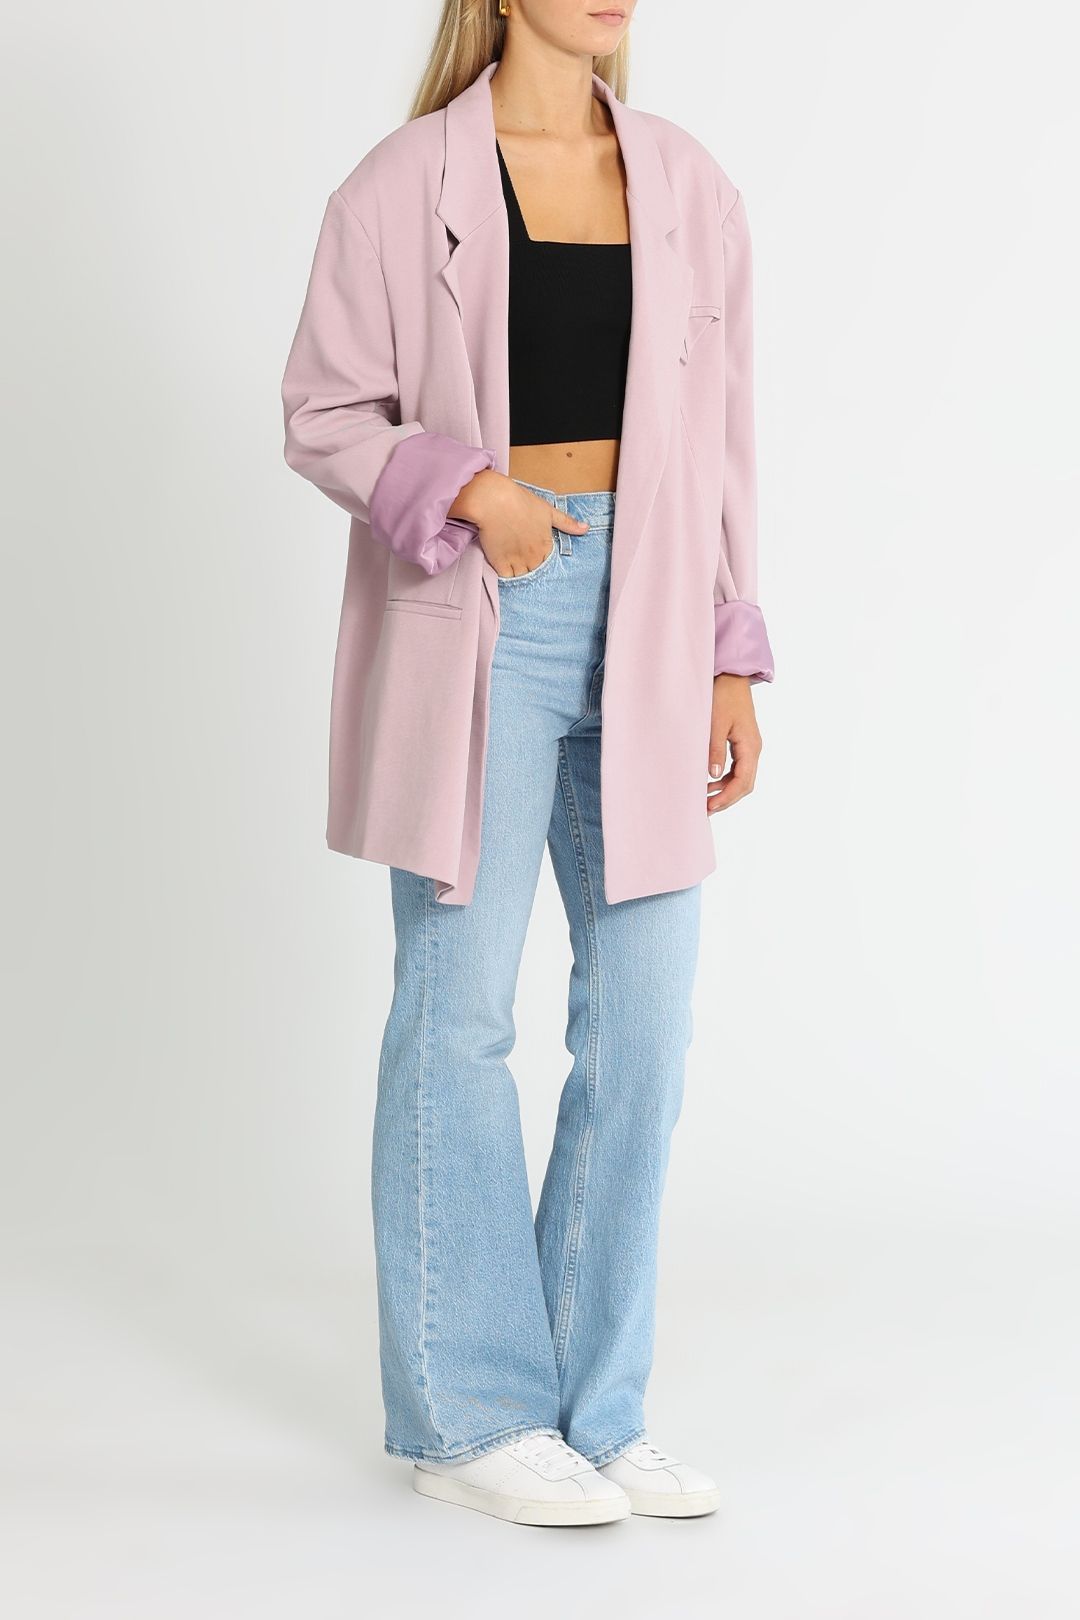 Blanca Samantha Blazer in Lilac Relaxed Fit